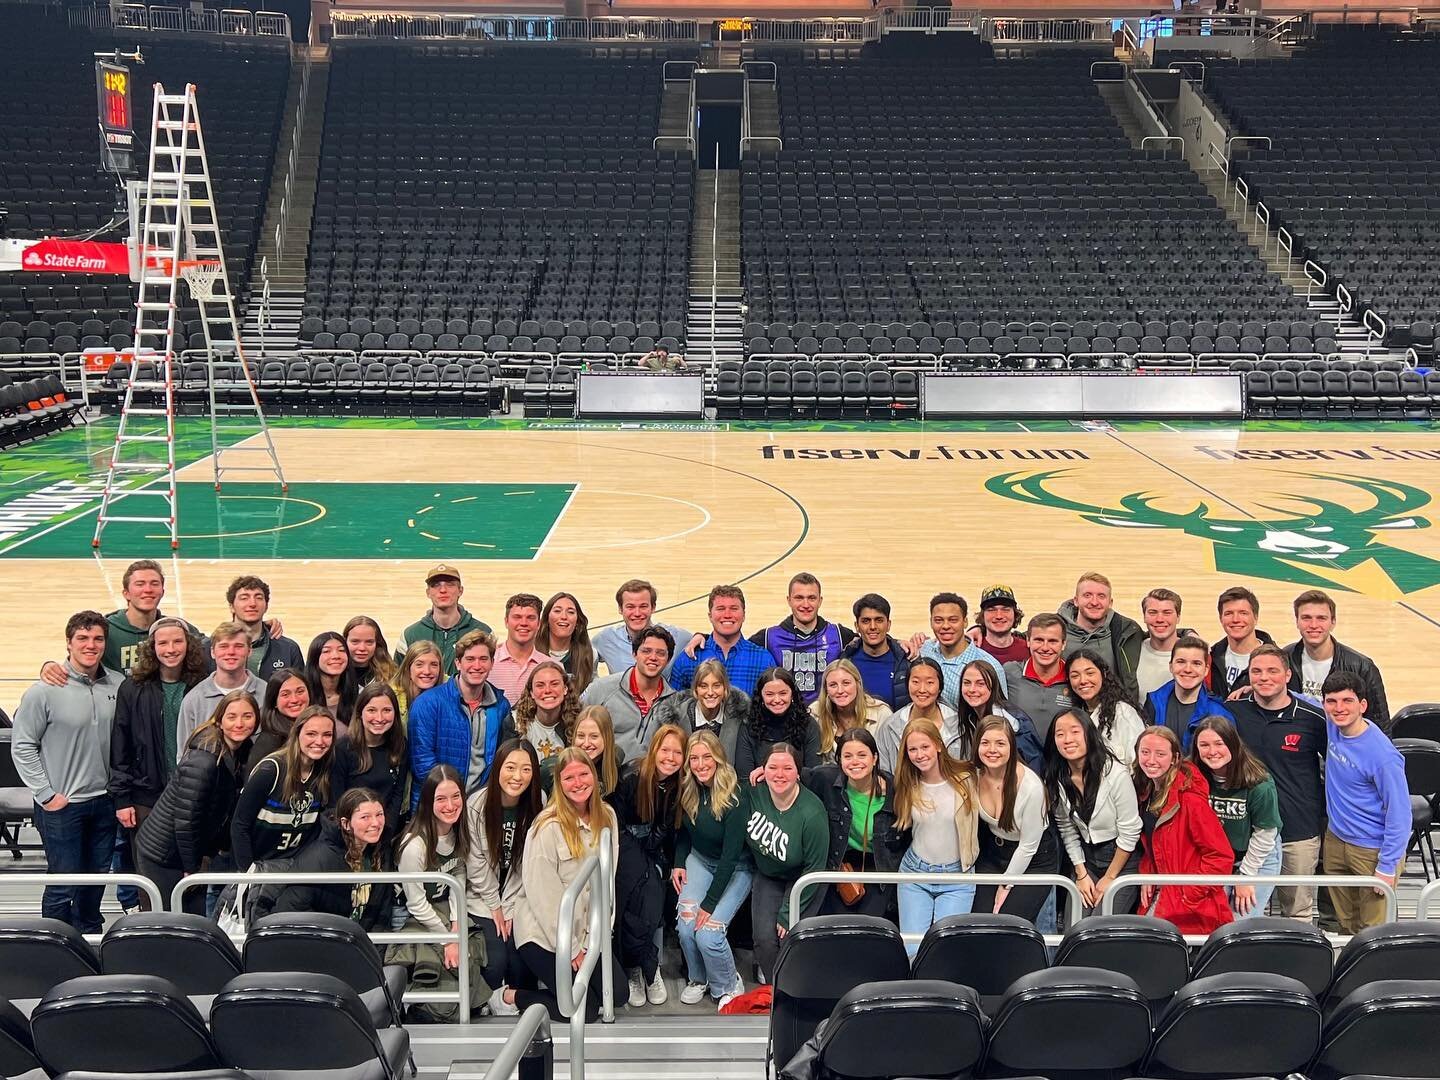 The Psi chapter went to the Fiserv Forum for Sports Management Day with the Milwaukee Bucks! With a guided tour alongside a panel of professionals in the sports business world, the chapter gained great insight into the sports management industry. Tha